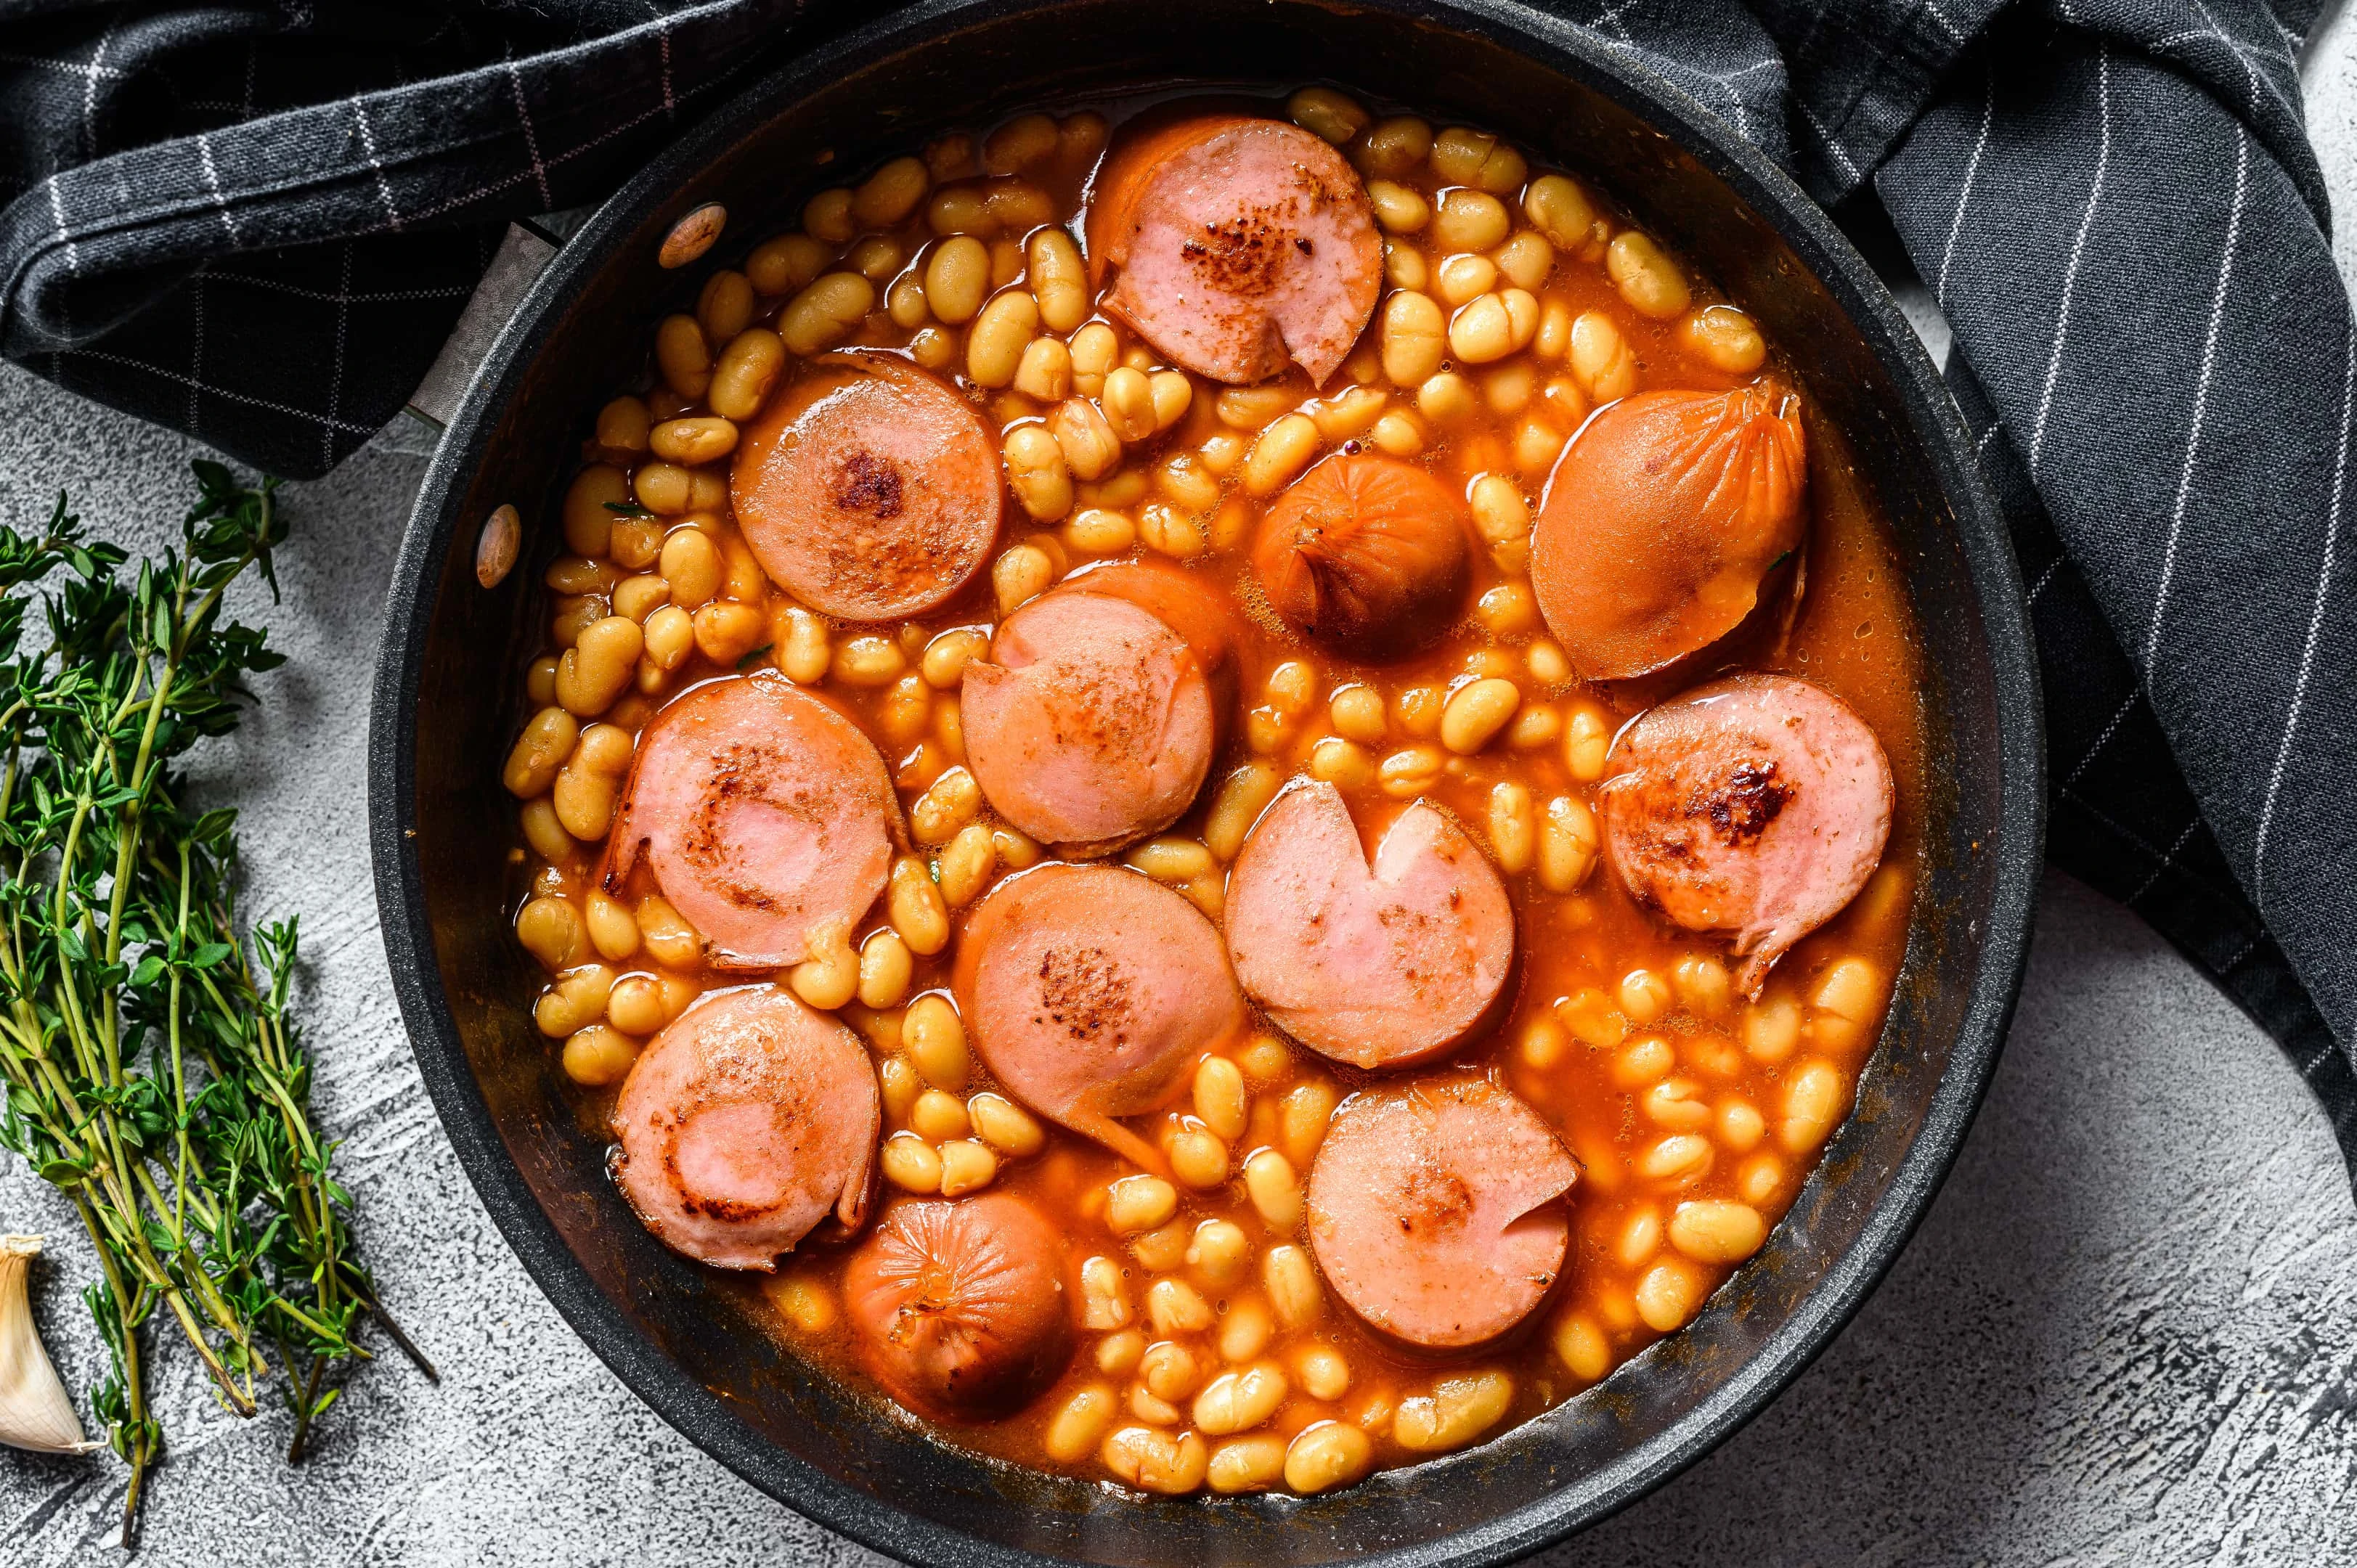 Beans with sausages in tomato sauce in a pan